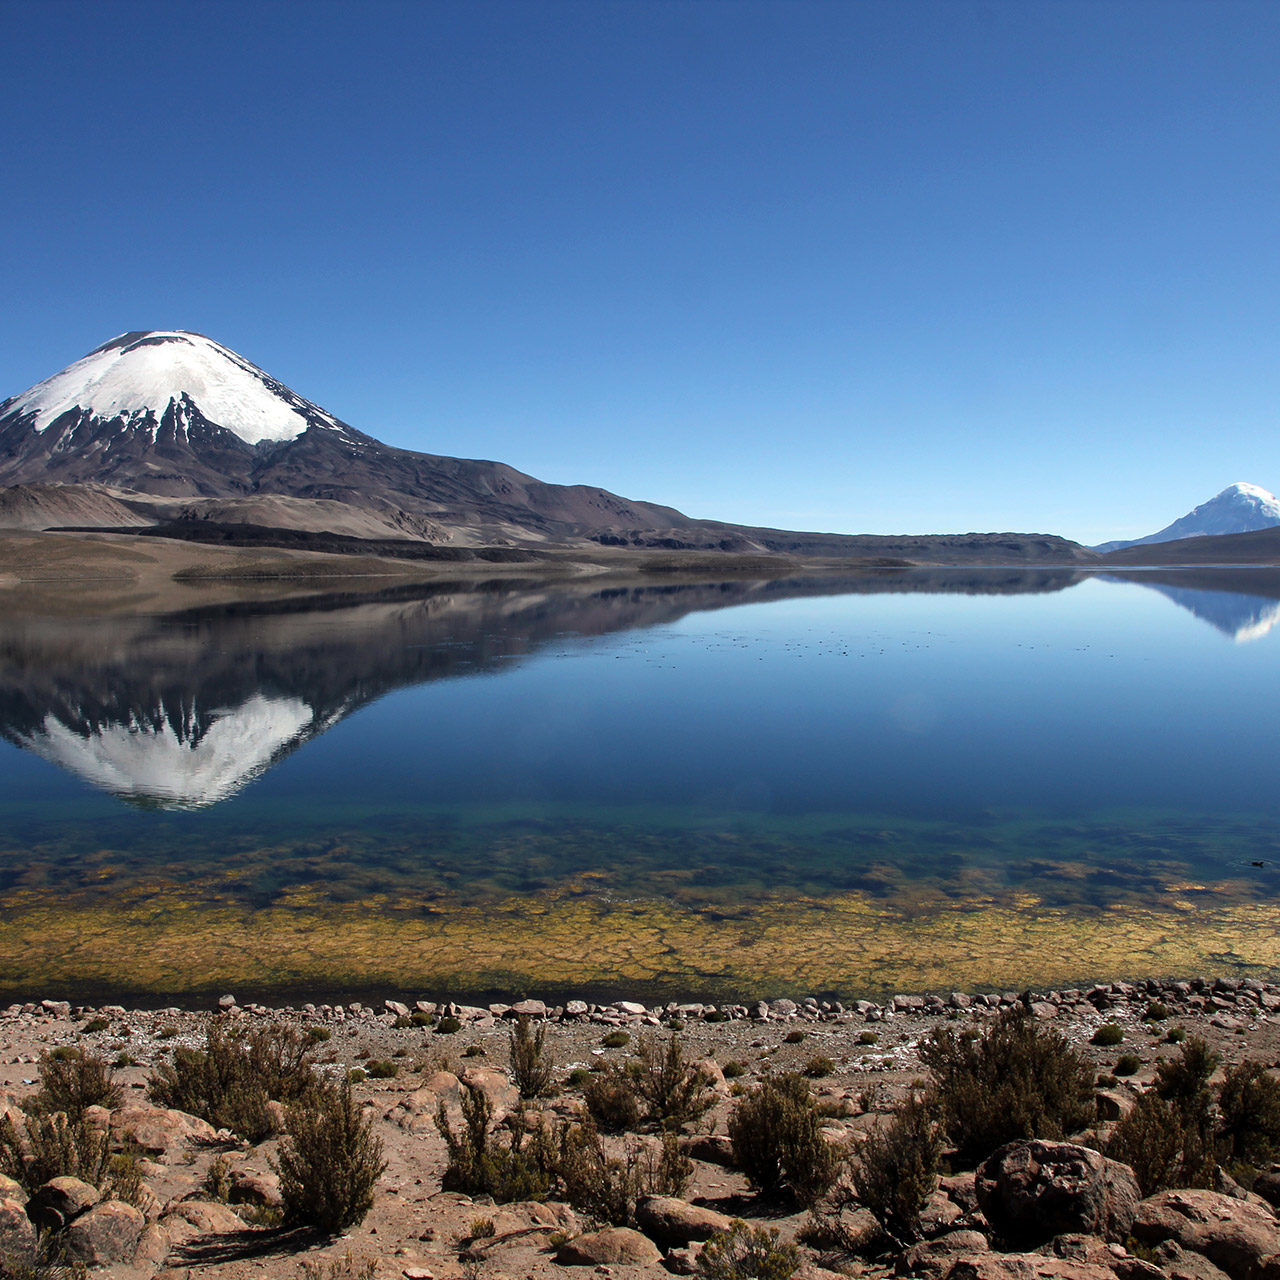 Expedition Through the Atacama Desert & Altiplano Tourism in Northern Chile